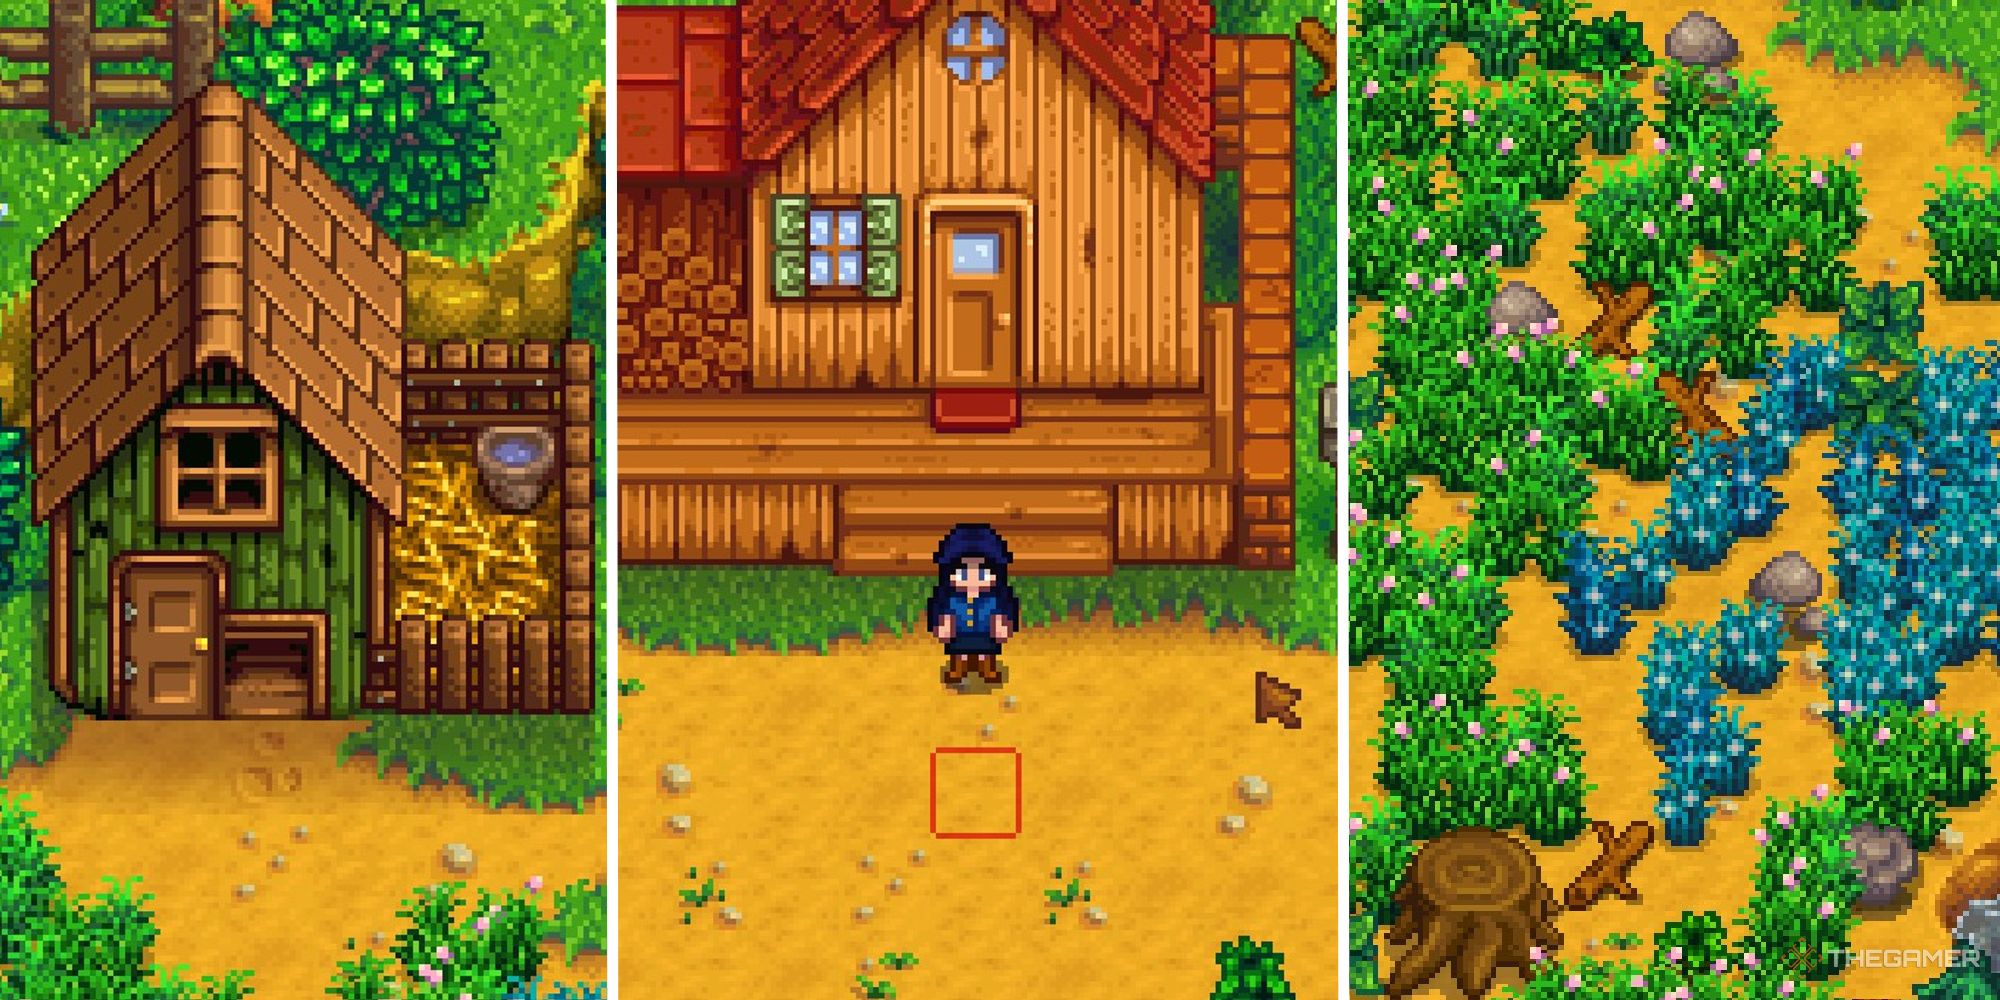 stardew valley meadowlands farm split image showing coop, farmhouse, and blue grass